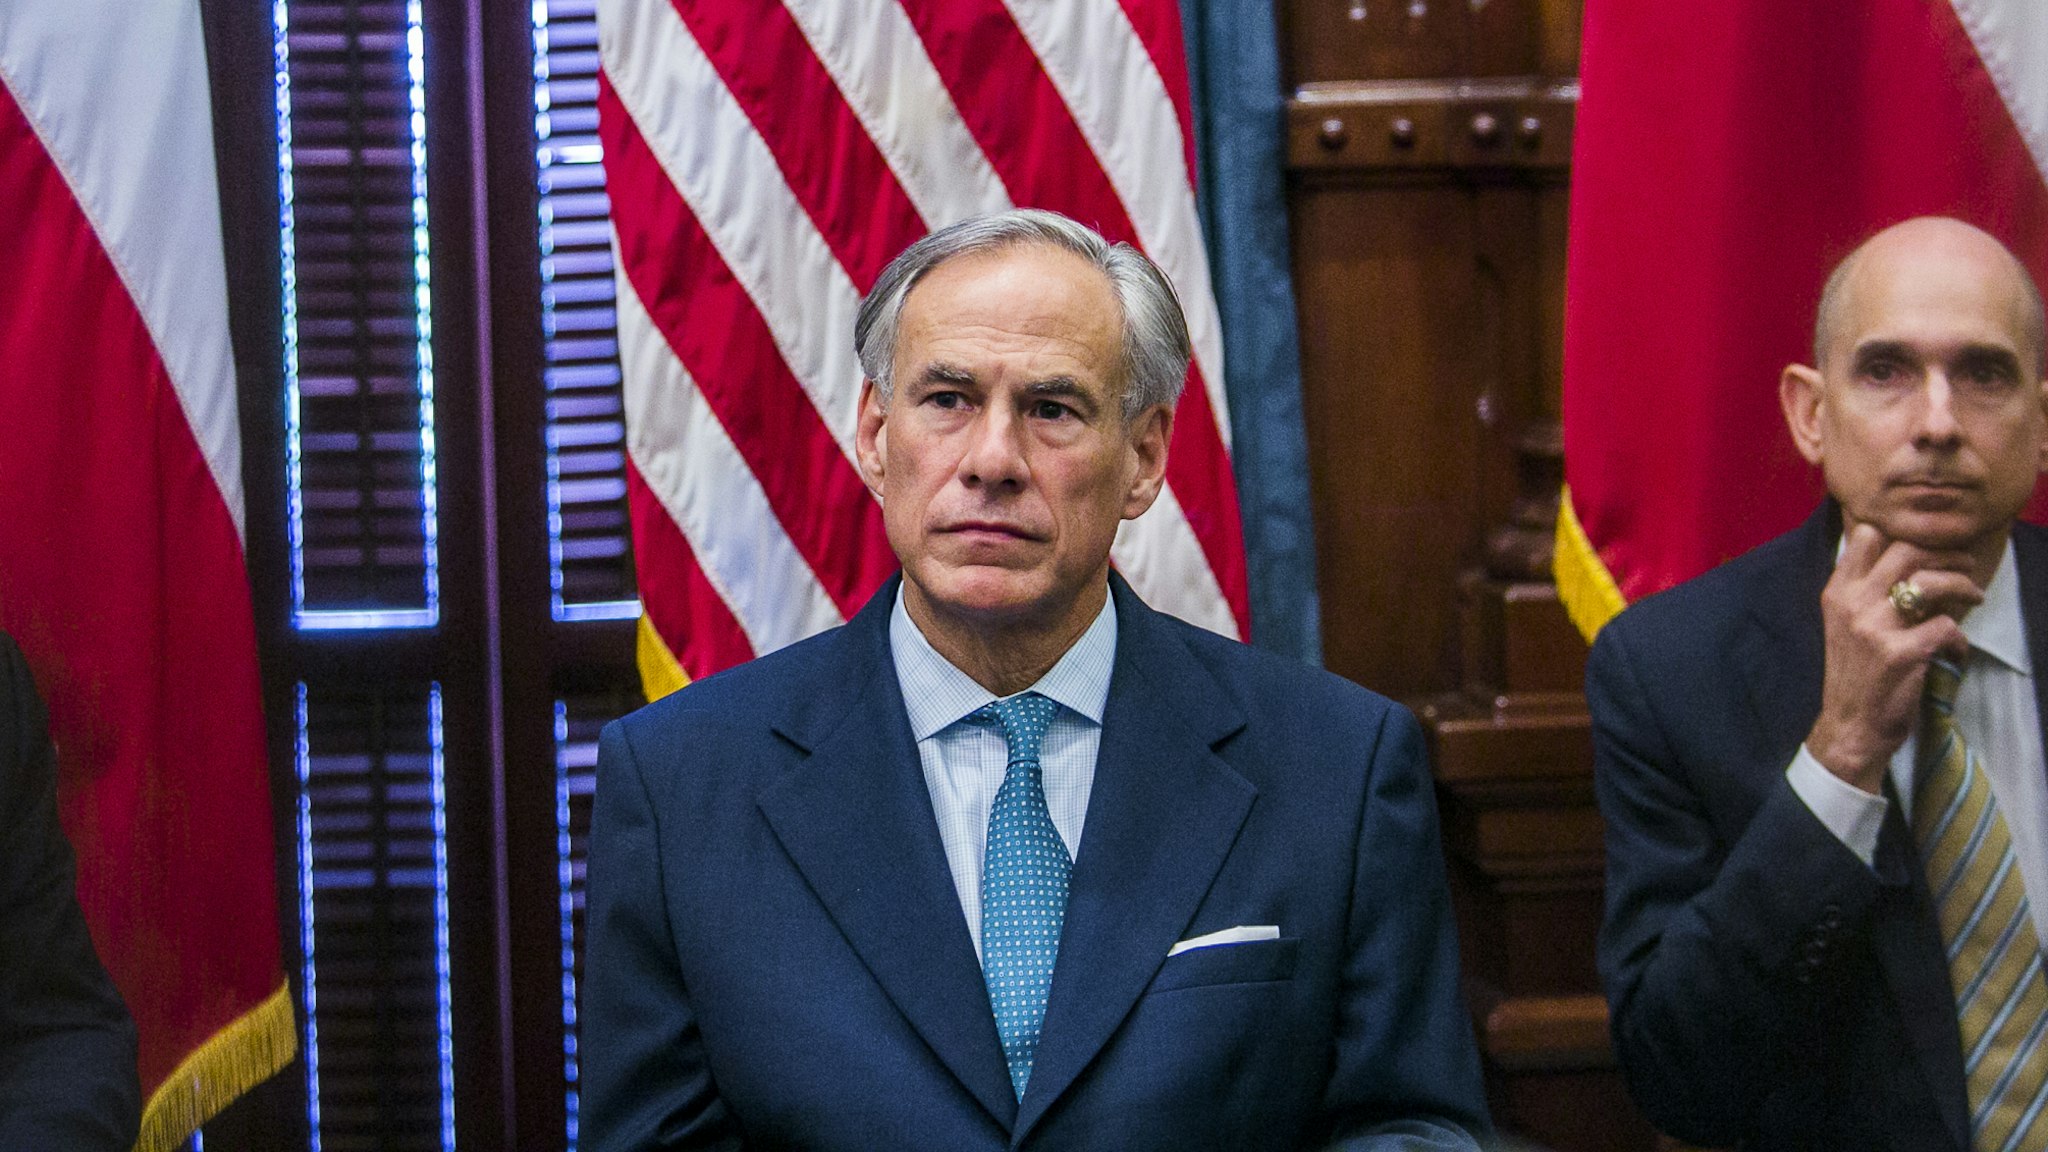 AUSTIN, TX - MAY 24: Texas Governor Greg Abbott (C) holds a roundtable discussion with victims, family, and friends affected by the Santa Fe, Texas school shooting at the state capital on May 24, 2018 in Austin, Texas. Representatives from Sutherland Springs, Alpine, and Killeen were also invited and address the governor.